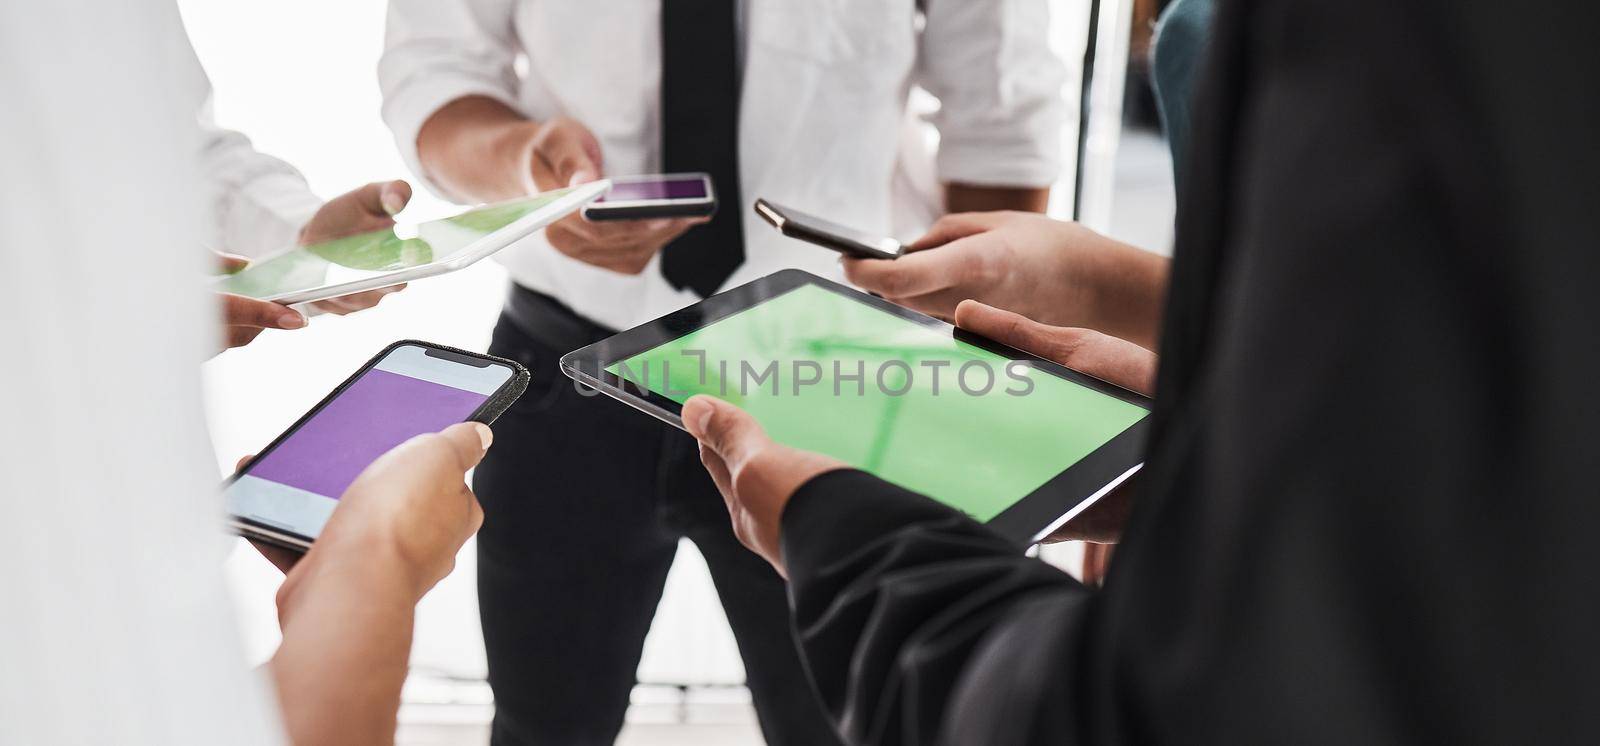 Linking up to get more done. Closeup shot of a group of unrecognisable businesspeople using digital devices together in an office